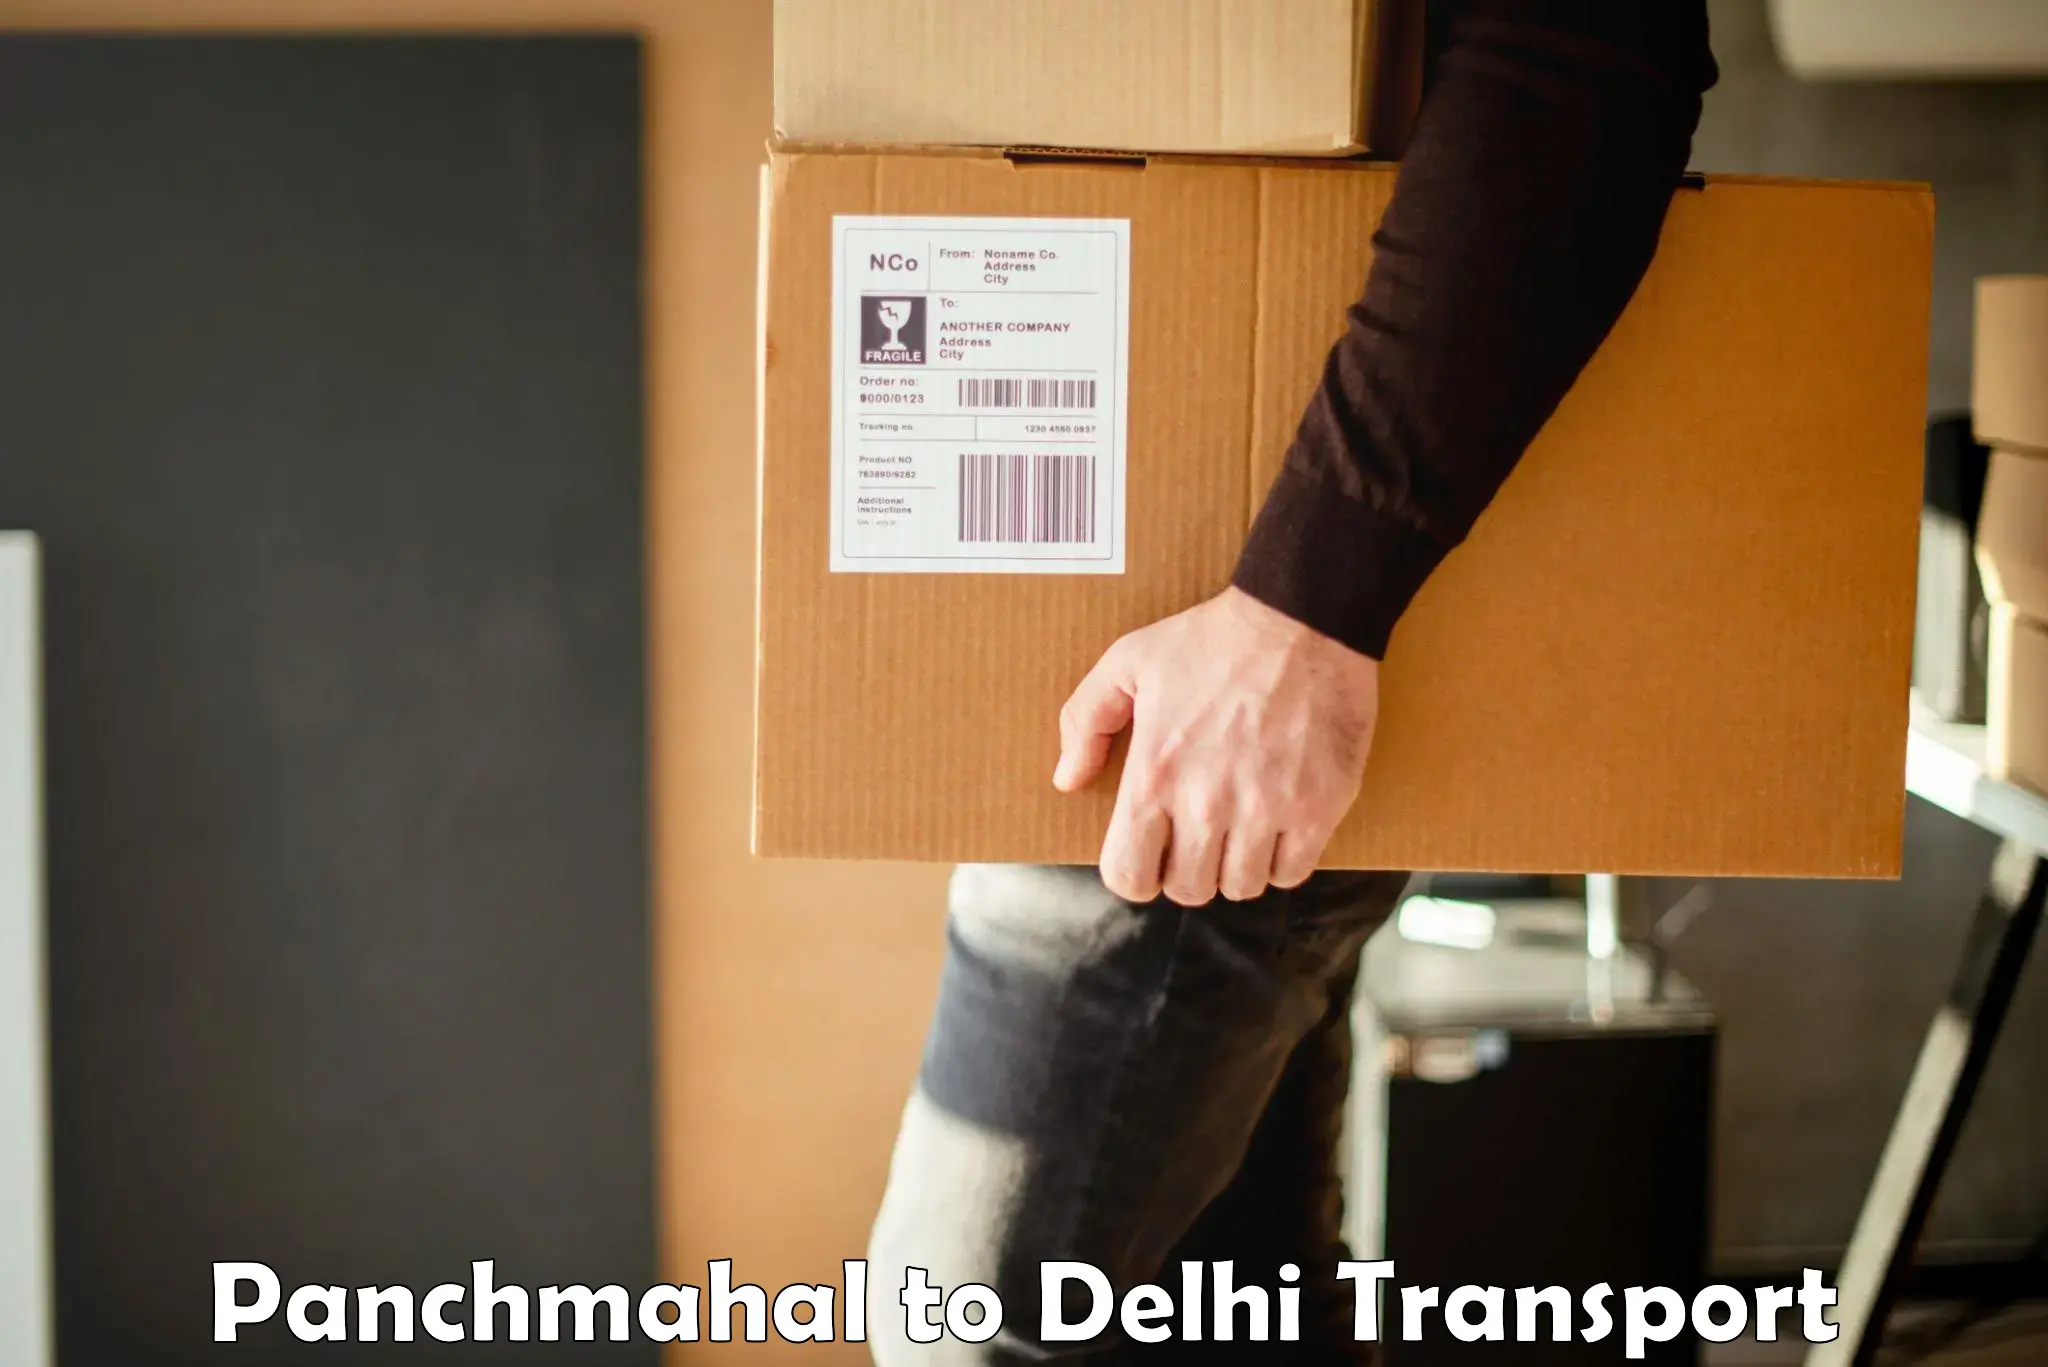 Lorry transport service Panchmahal to Delhi